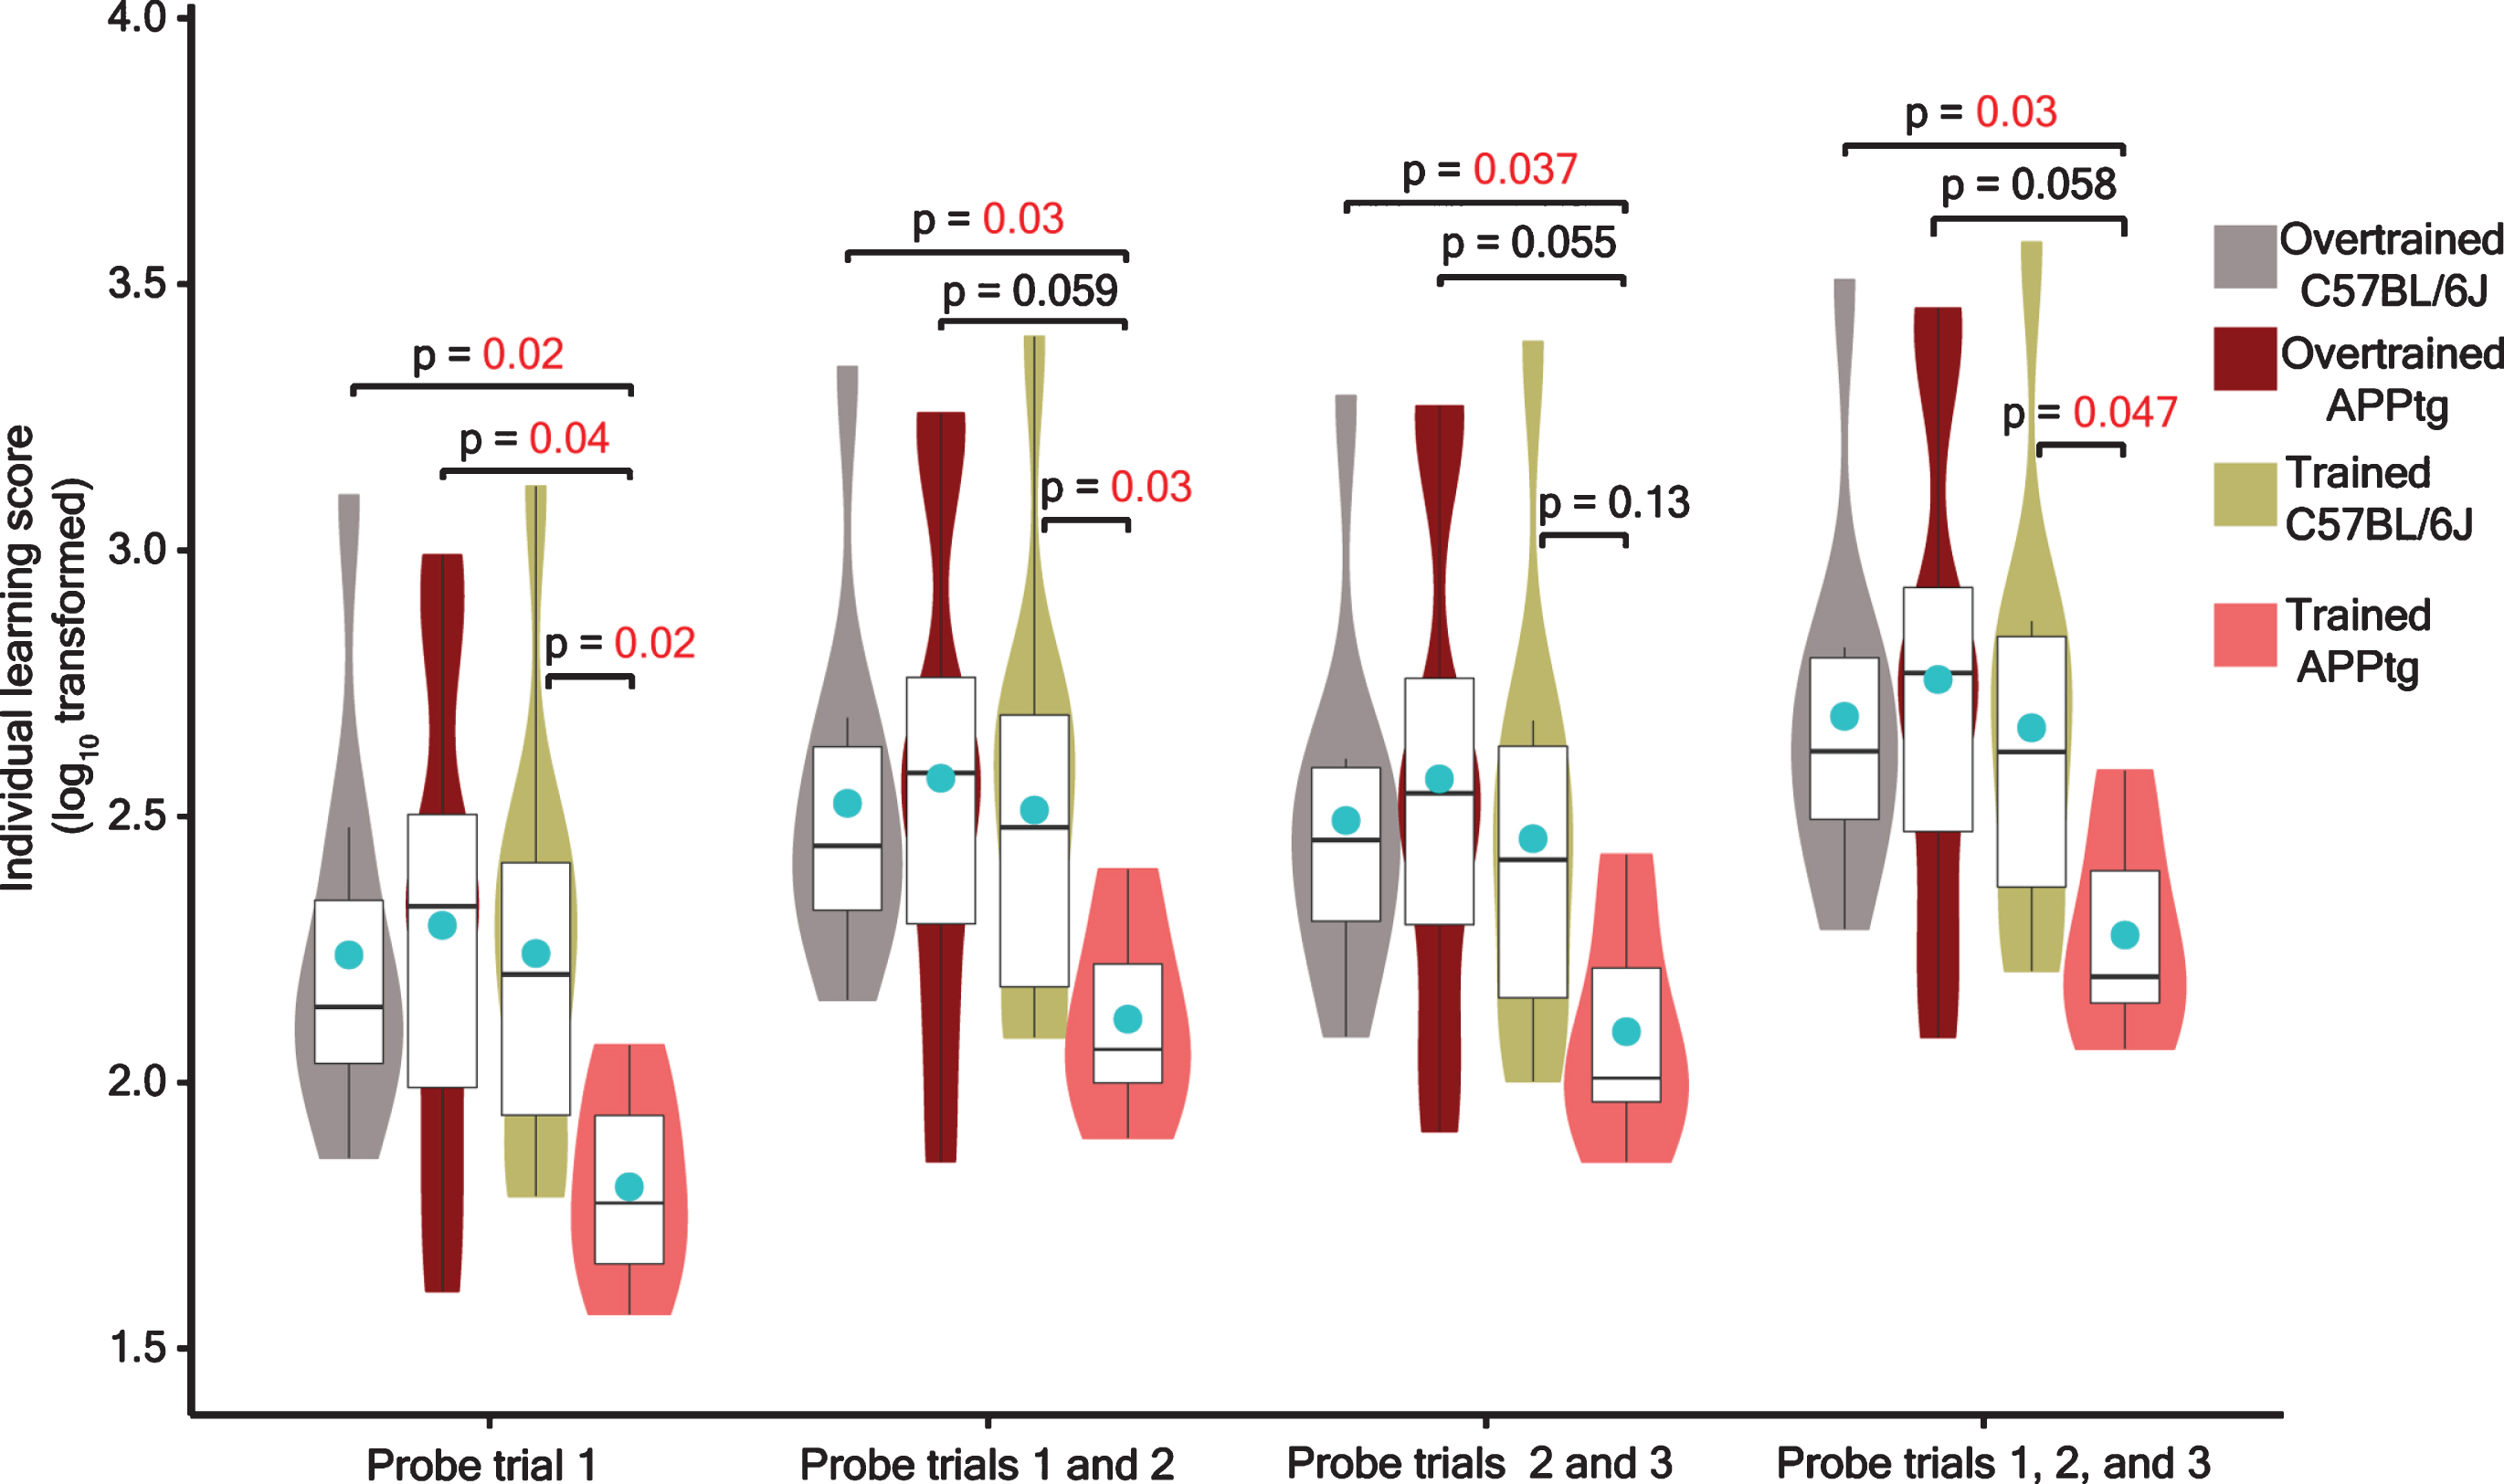 Effect of cognitive overtraining in the learning score of 7-month-old mice. The learning score (LS) of a mouse was determined for probe trial 1, probe trials 1 and 2, probe trials 2 and 3, and probe trials 1, 2, and 3, respectively. The LS data were log10 transformed and visualized as violin plot cum boxplot in which a circular dot (cyan color) represents the mean and the horizontal line inside the boxplot denotes the median. For probe trial(s), a Kruskall-Wallis test was performed on a log10 transformed LS data. In case of significant group differences, a post hoc Dunn’s test with Bonferroni correction was performed for multiple pairwise comparisons at alpha level of 0.05. The significant p values were denoted alongside figure. Details: For probe trial 1, a Kruskal-Wallis test showed a significant group difference [χ2(3)=12.11, p = 0.006]. For probe trials 1 and 2, we also found a significant group difference [χ2(3)=11.21, p = 0.01]. For probe trials 2 and 3, we also found a significant group difference [χ2(3)=9.80, p = 0.02]. Finally, we also found a significant group difference for probe trials 1, 2, and 3 [χ2(3)=11.00, p = 0.01]. Number of animals for each group were as follows: overtrained C57BL/6J N = 10; overtrained APPtg N = 8; trained C57BL/6J N = 10; trained APPtg N = 10.